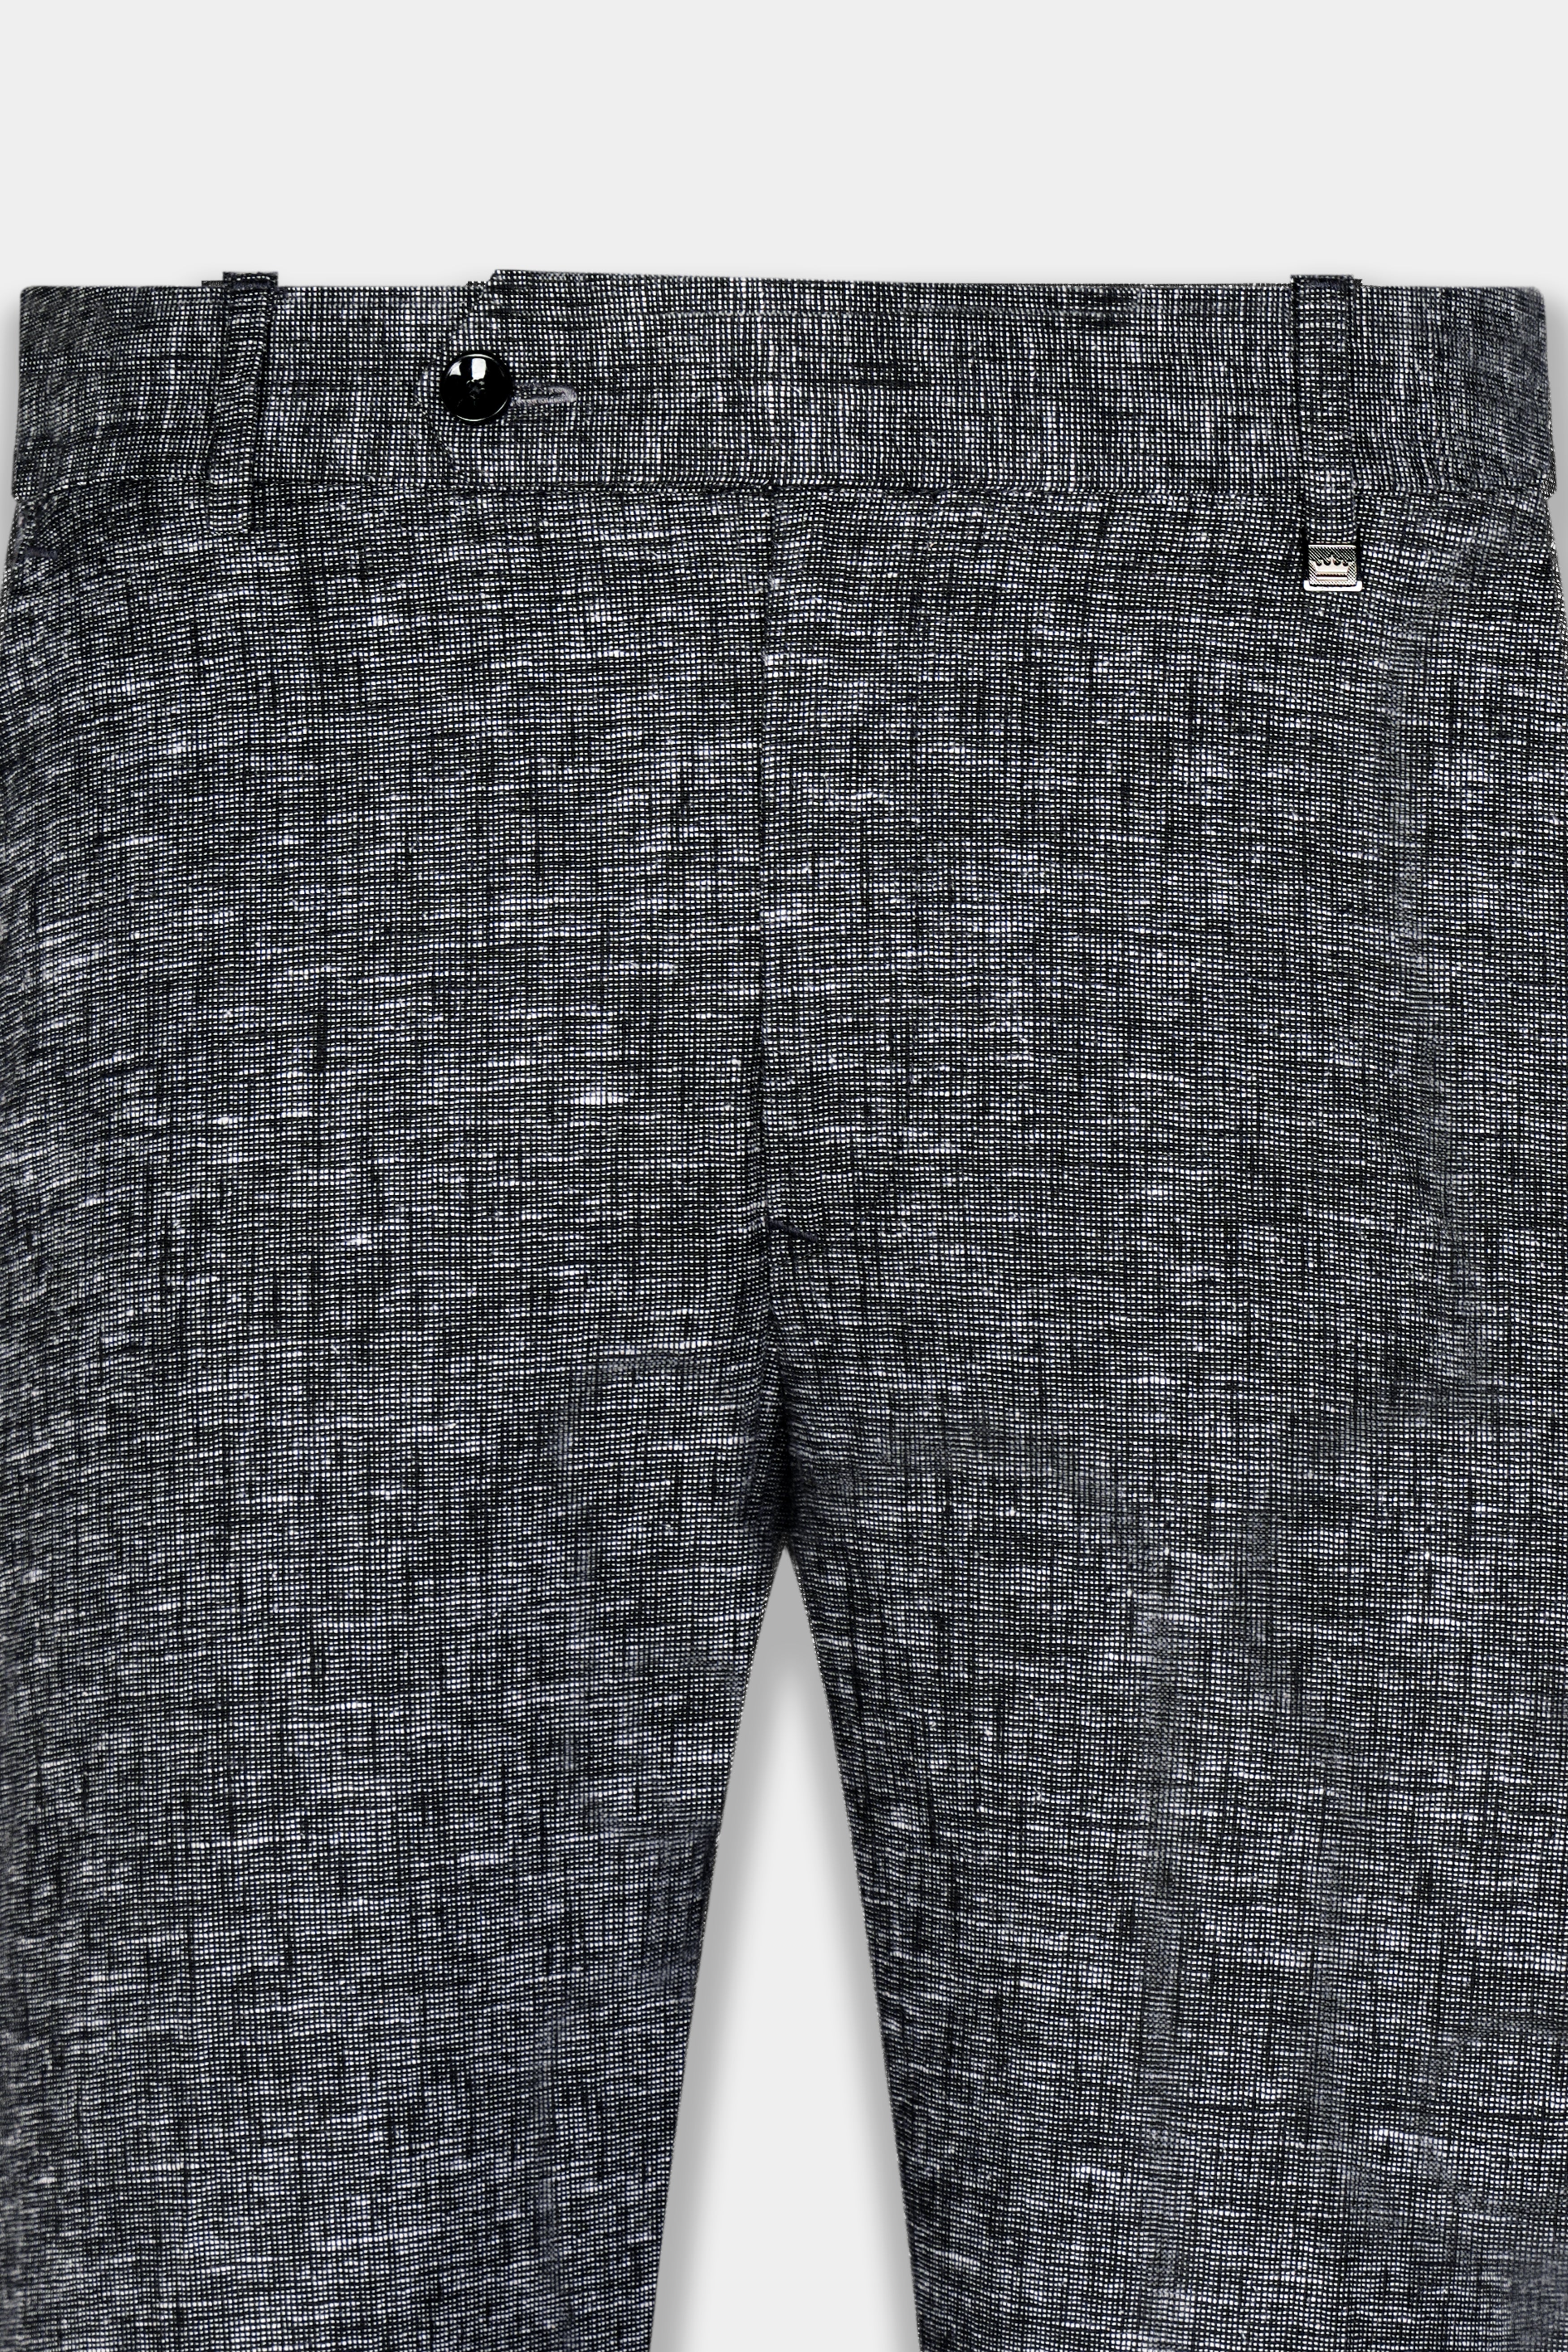 Arsenic Gray Luxurious Linen Single Breasted Suit ST2922-SB-36, ST2922-SB-38, ST2922-SB-40, ST2922-SB-42, ST2922-SB-44, ST2922-SB-46, ST2922-SB-48, ST2922-SB-50, ST2922-SB-52, ST2922-SB-54, ST2922-SB-56, ST2922-SB-58, ST2922-SB-60